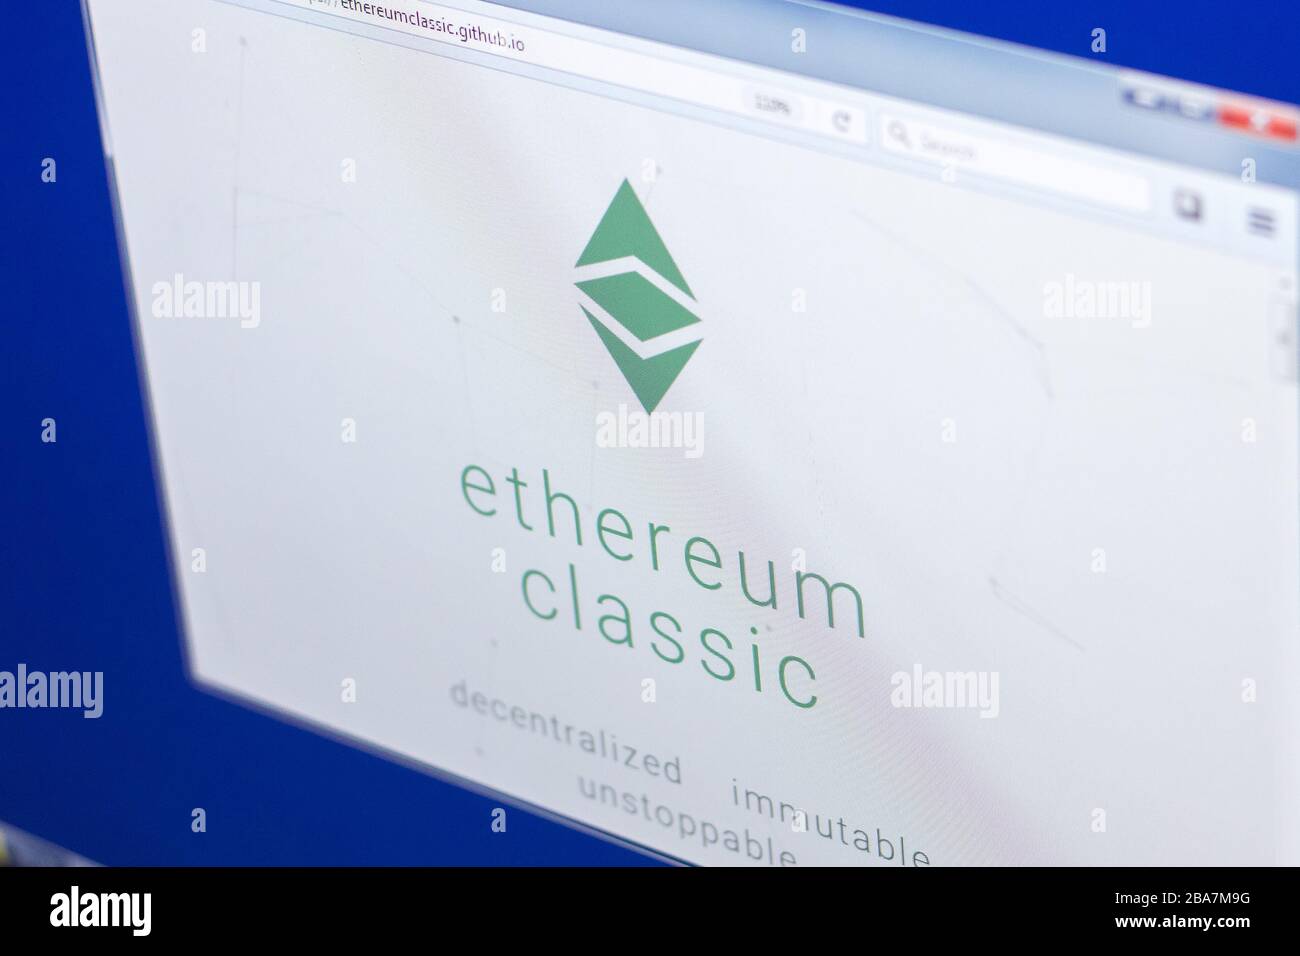 Ryazan, Russia - March 29, 2018 - Homepage of Ethereum Classic cryptocurrency on PC display, web adress - ethereumclassic.org Stock Photo